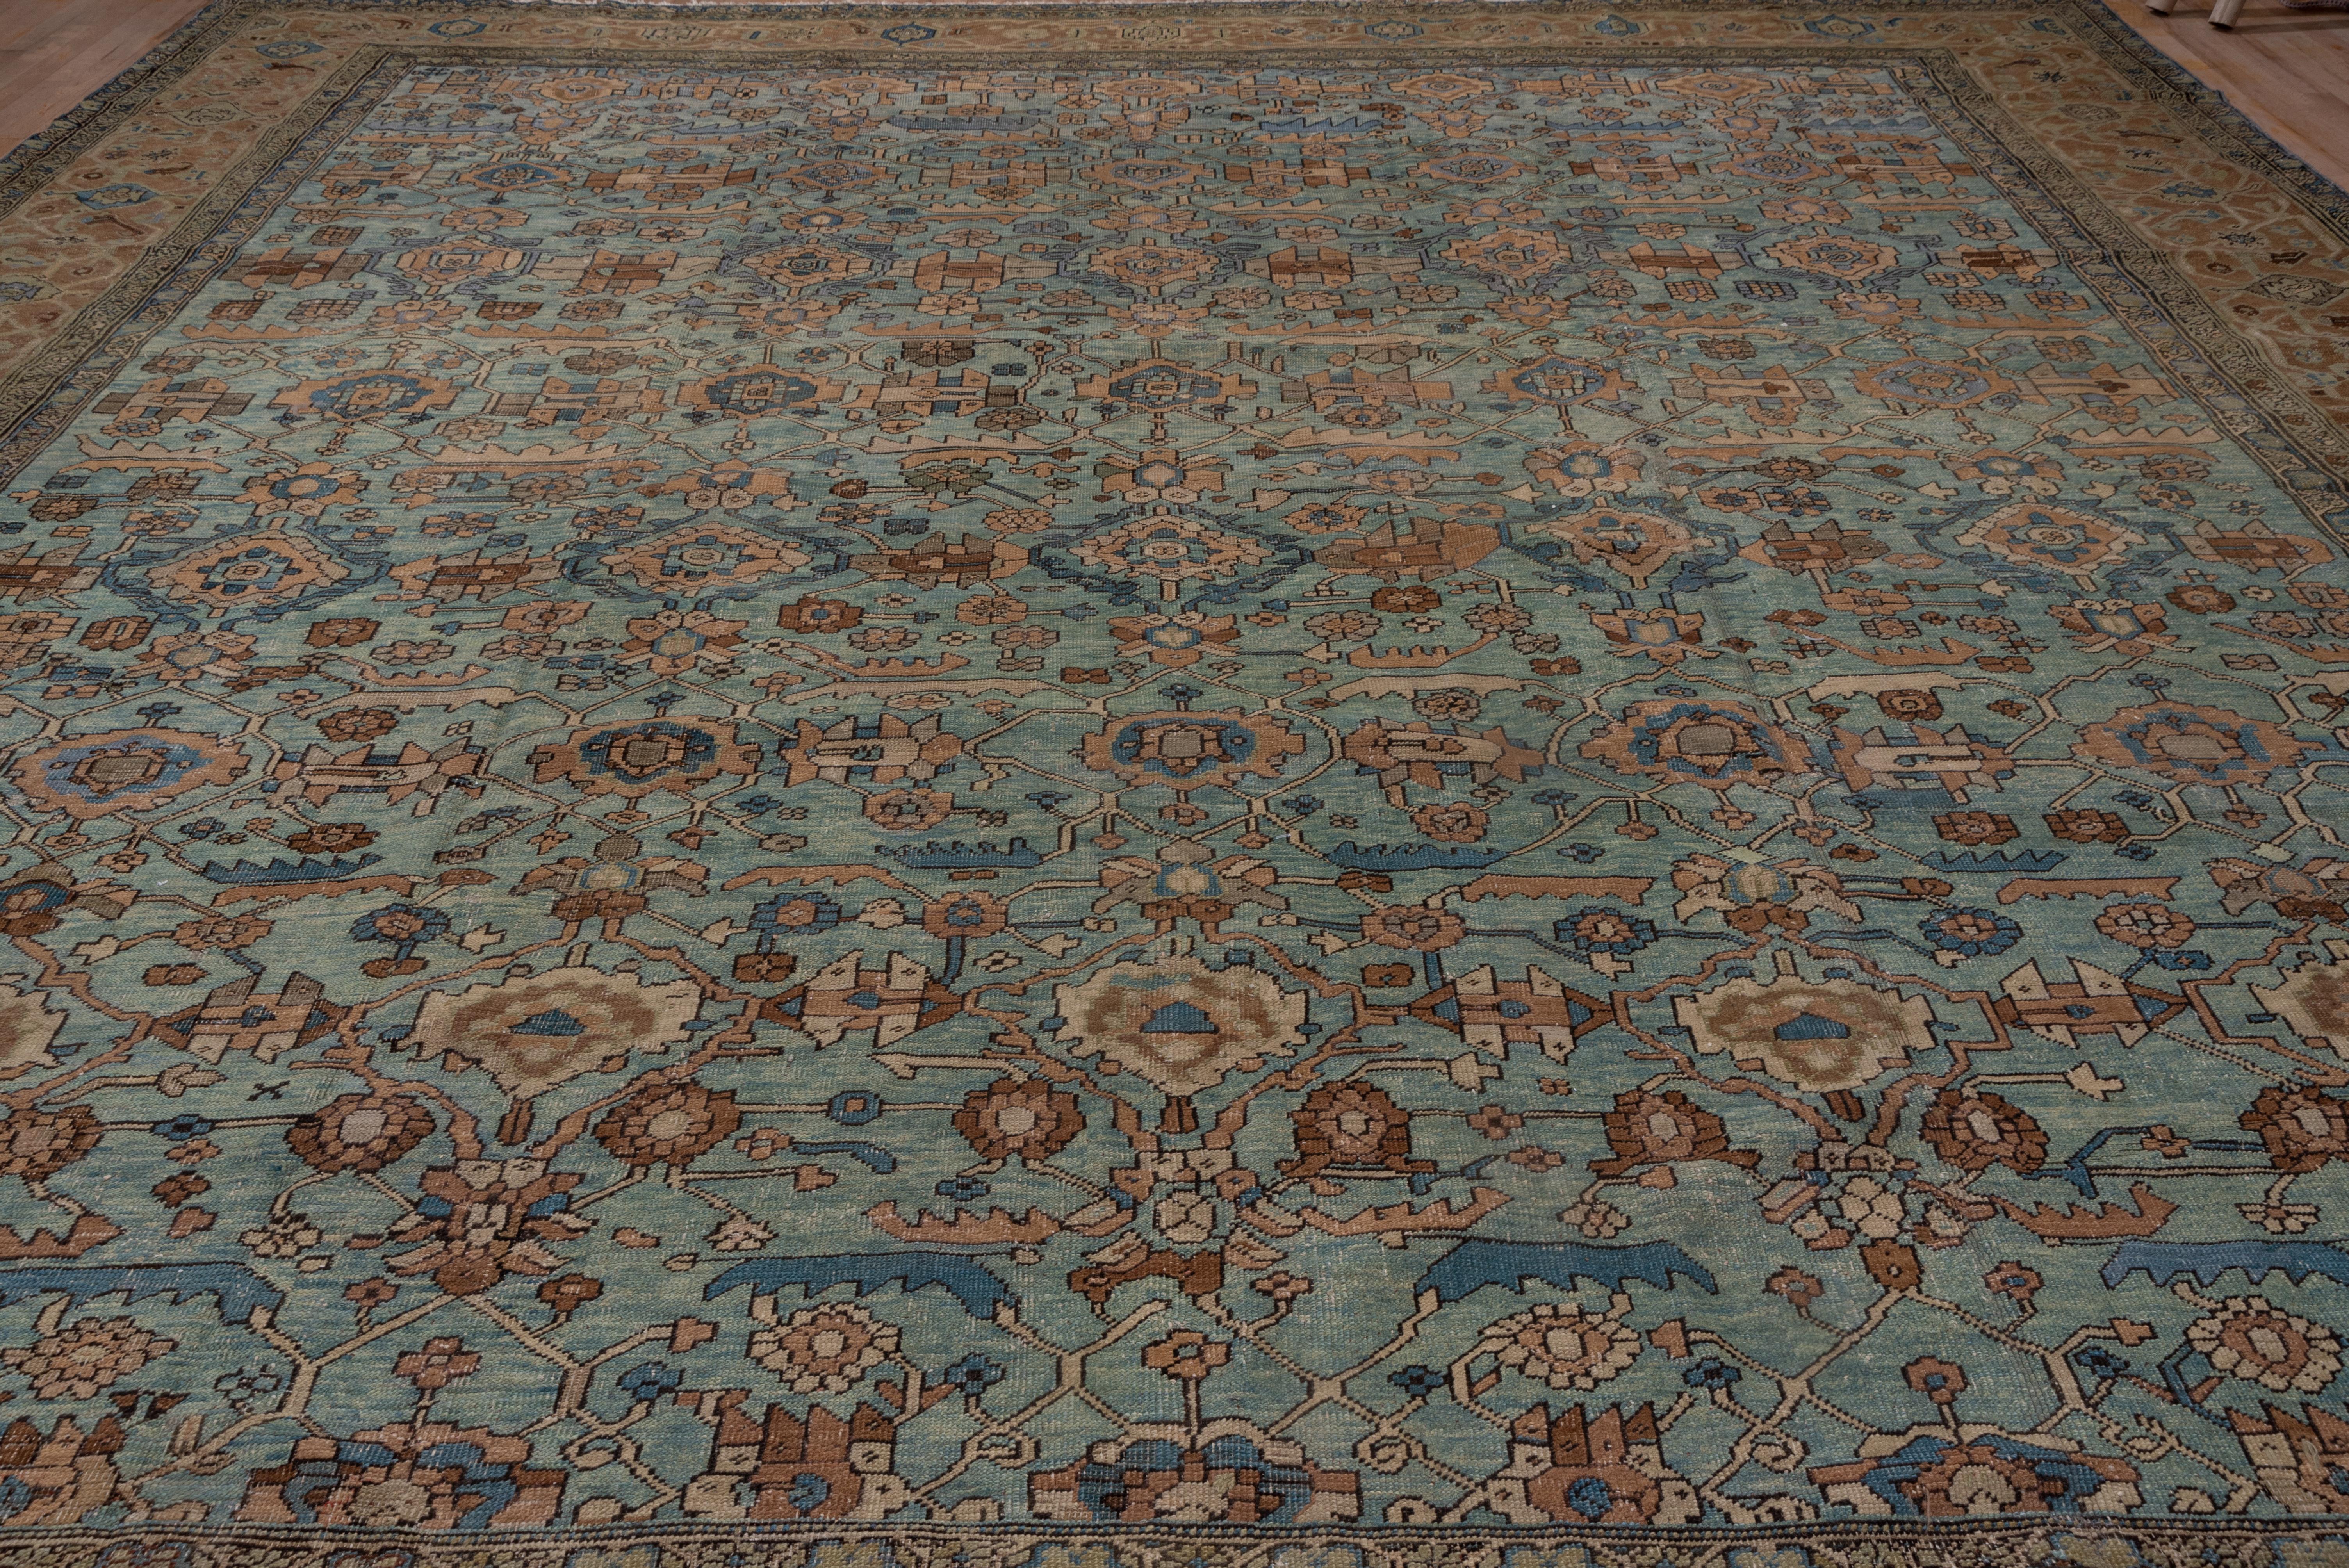 The abrashed aqua field displays a basically allover pattern of semi-geometric leaves, flowers and small palmettes, all in the chunky Heriz style. This unusually formatted and colored NW Persian village carpet has a buff-rust simply drawn turtle